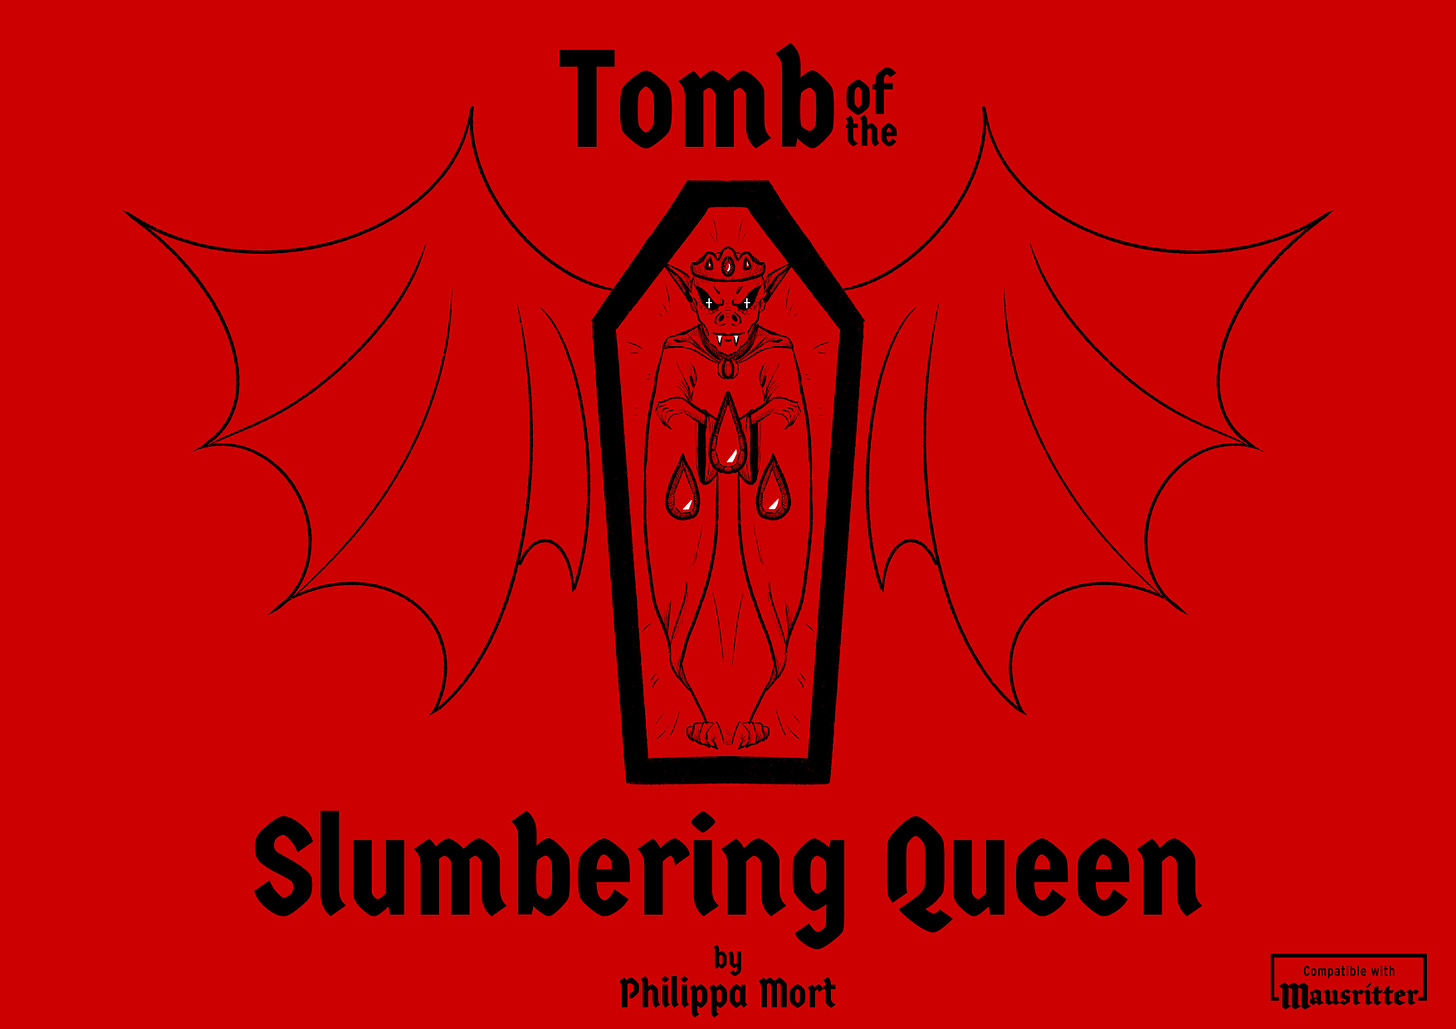 Cover of Tomb of the Slumbering Queen which is a black and red illustration of a vampire bat queen inside a coffin.